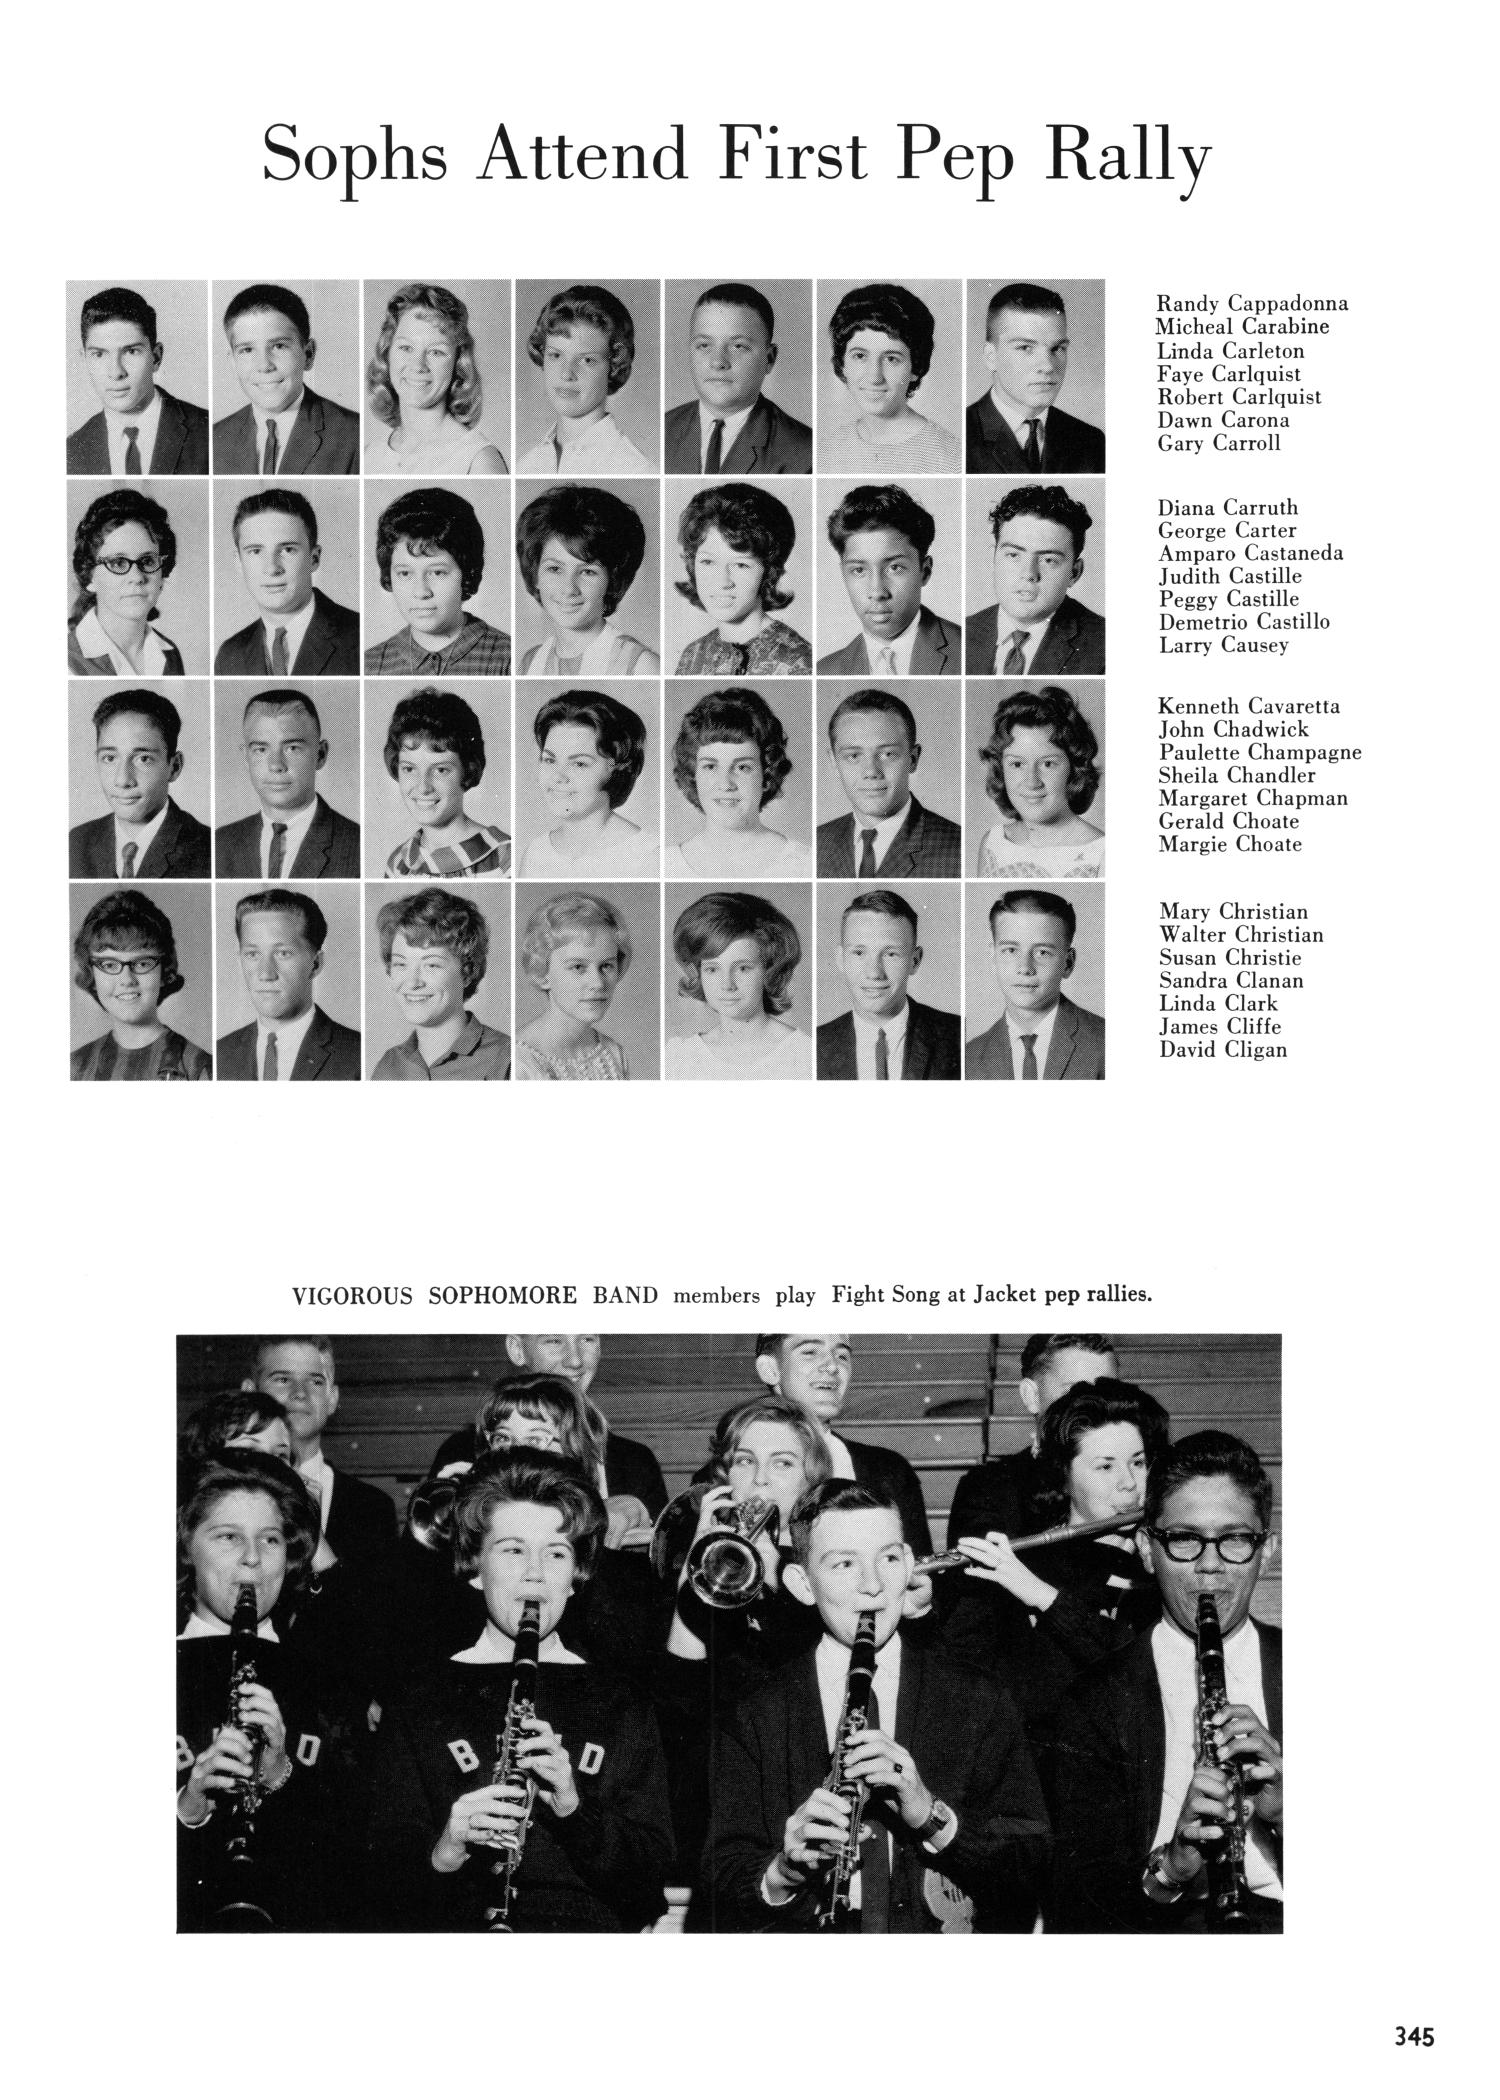 The Yellow Jacket, Yearbook of Thomas Jefferson High School, 1964
                                                
                                                    345
                                                